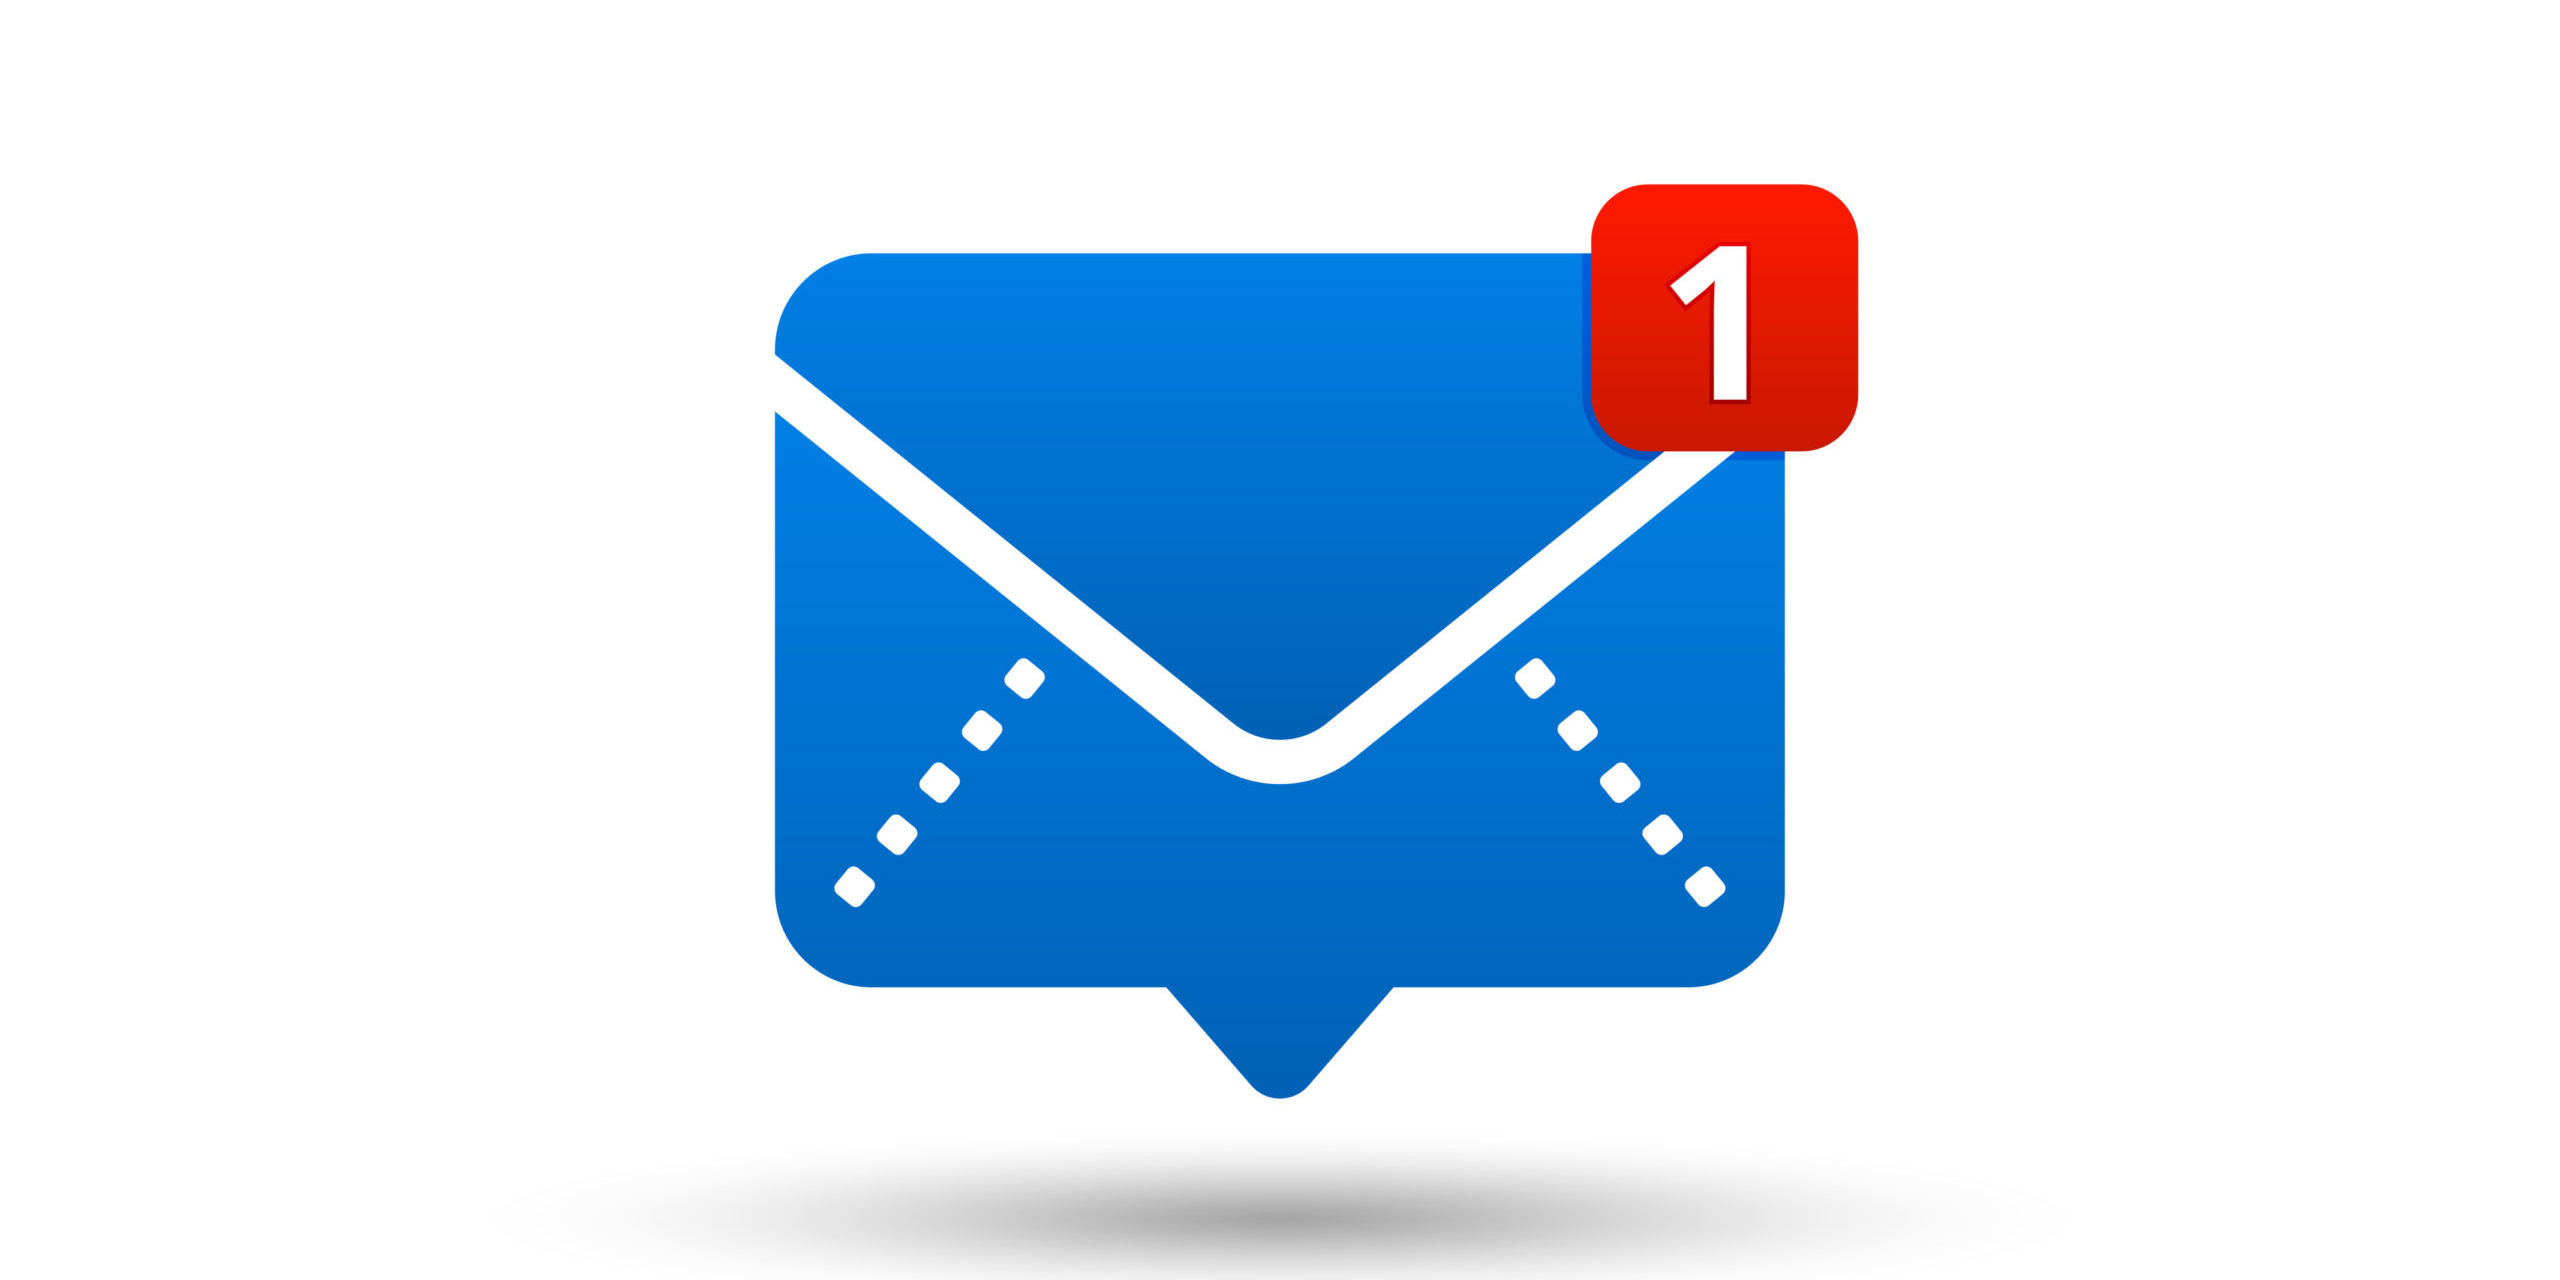 New message icon with notification. Envelope pointer with incoming message. Social media chat communication. New e-mail. Vector illustration